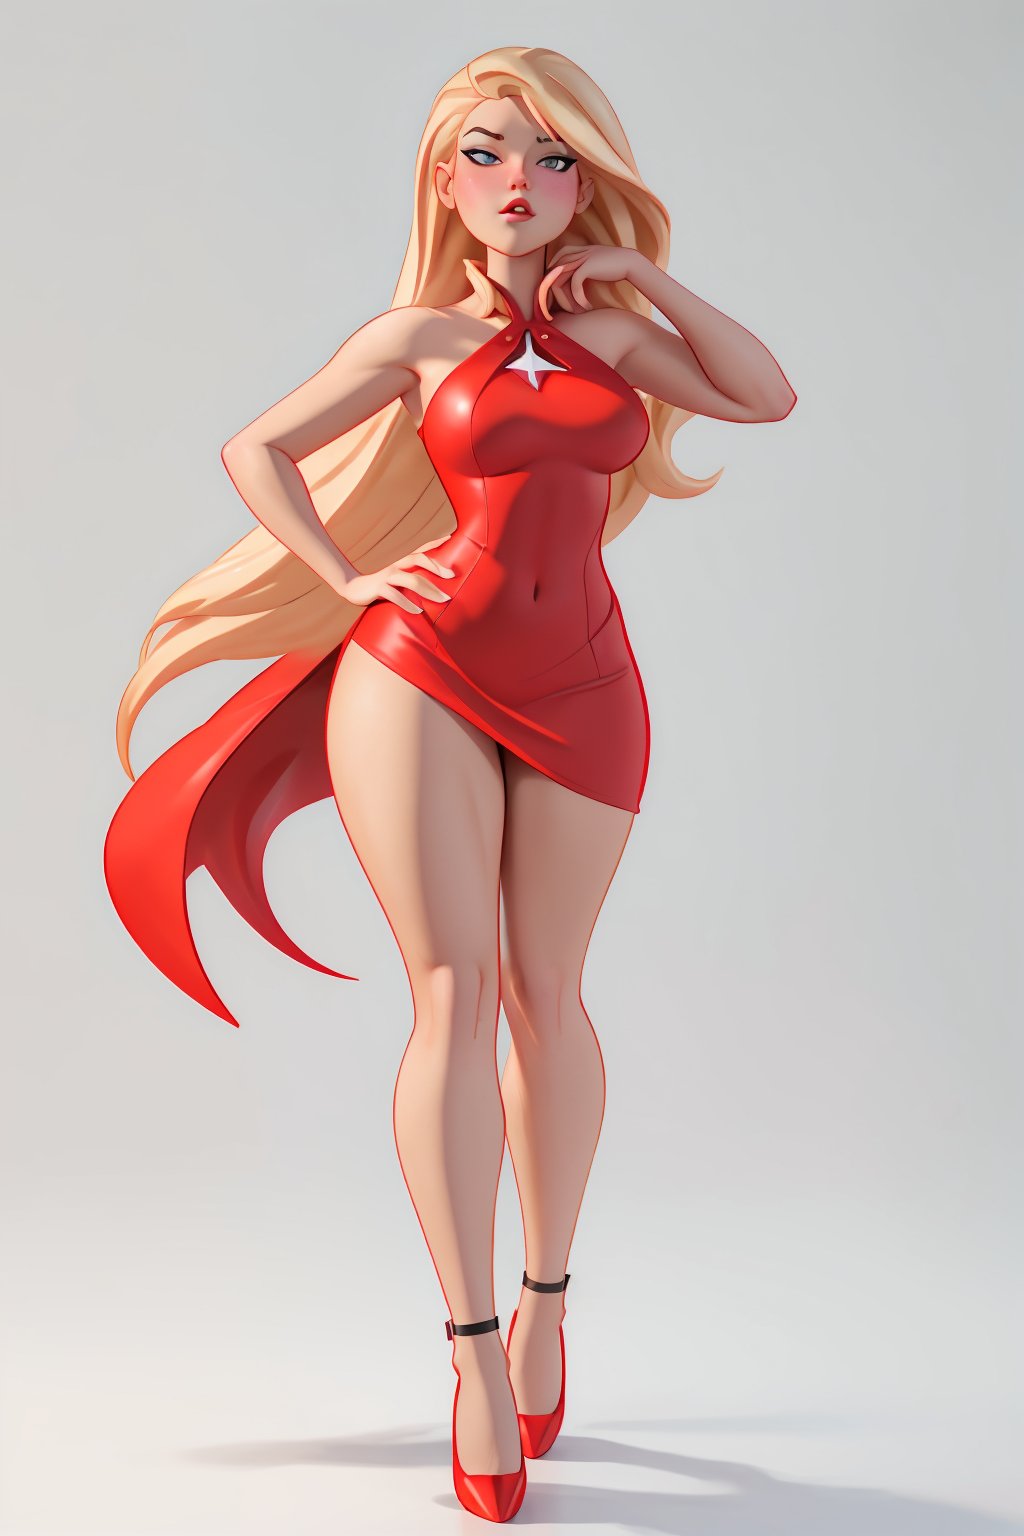 high detailed, masterpiece, 1girl cartoon character in a red dress and high heel shoes, blonde hair, perfect hands, big breast, wide hips, thick thighs, ultra realistic digital art, a 3D render, photorealism, clean scene, white background, white wall, shinny floor, white floor